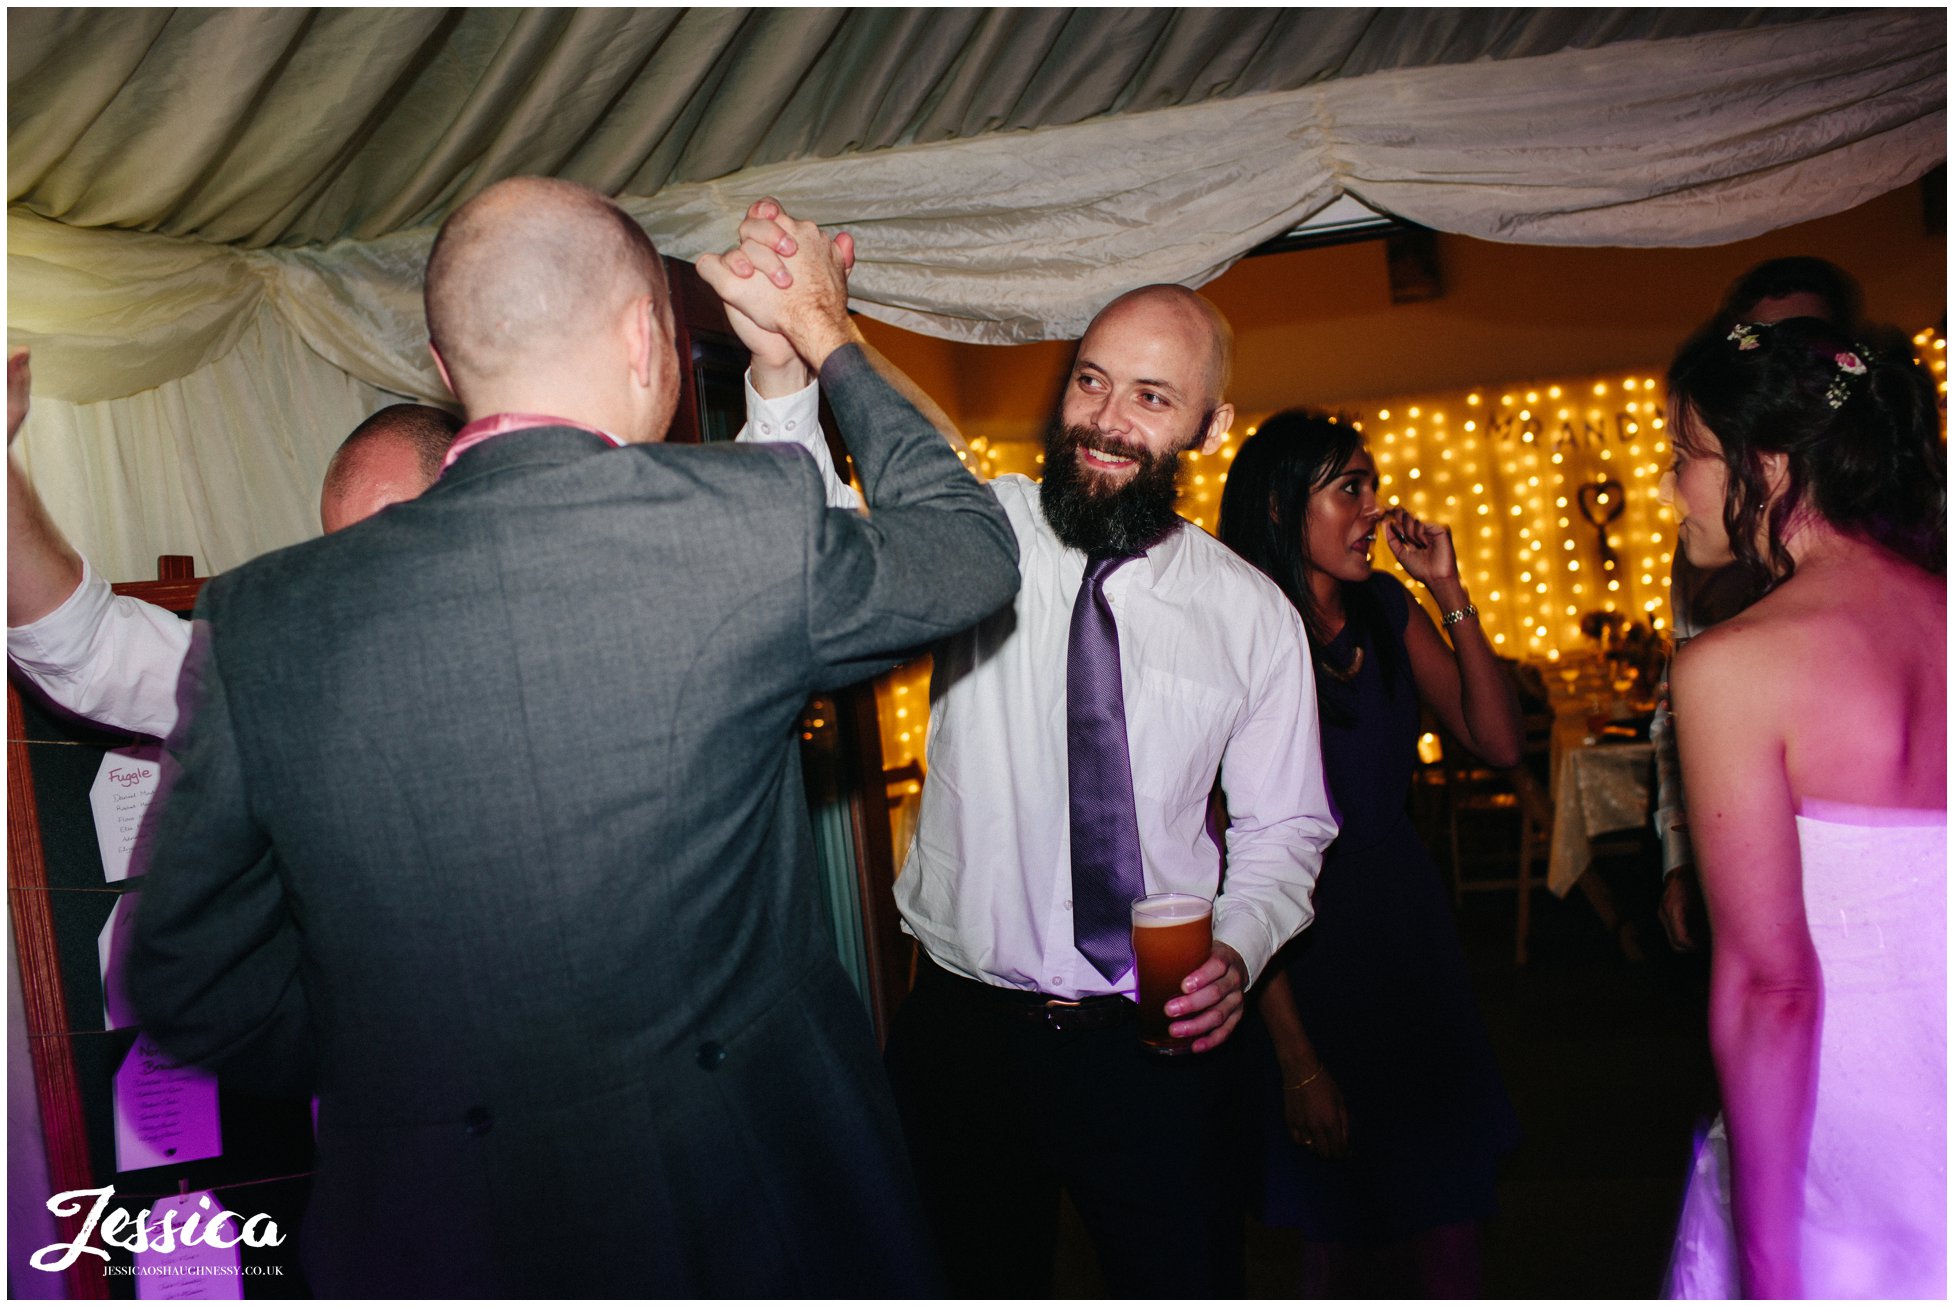 guests hi-5 whilst dancing at a wedding in cheshire